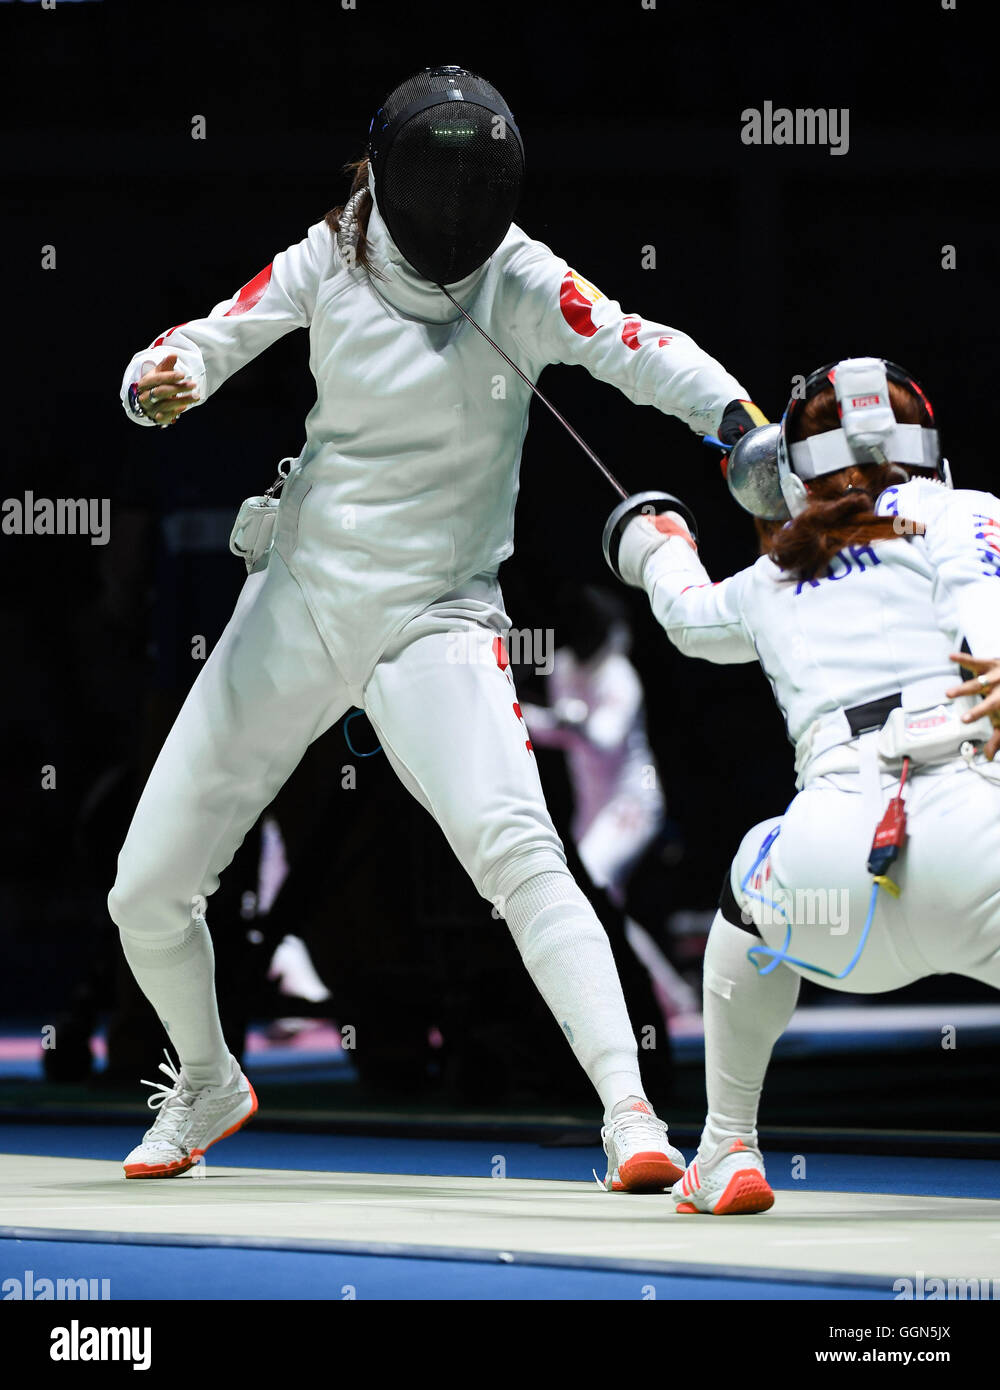 Rio De Janeiro, Brazil. 6th Aug, 2016. Sun Yujie (L) of China participates in the competition of Women's Epee indiviual Table 32 in Rio de Janeiro, Brazil, on Aug. 6, 2016. Sun Yujie lost to Kang Young Mi of KOR with 10:15. Credit:  Liu Dawei/Xinhua/Alamy Live News Stock Photo